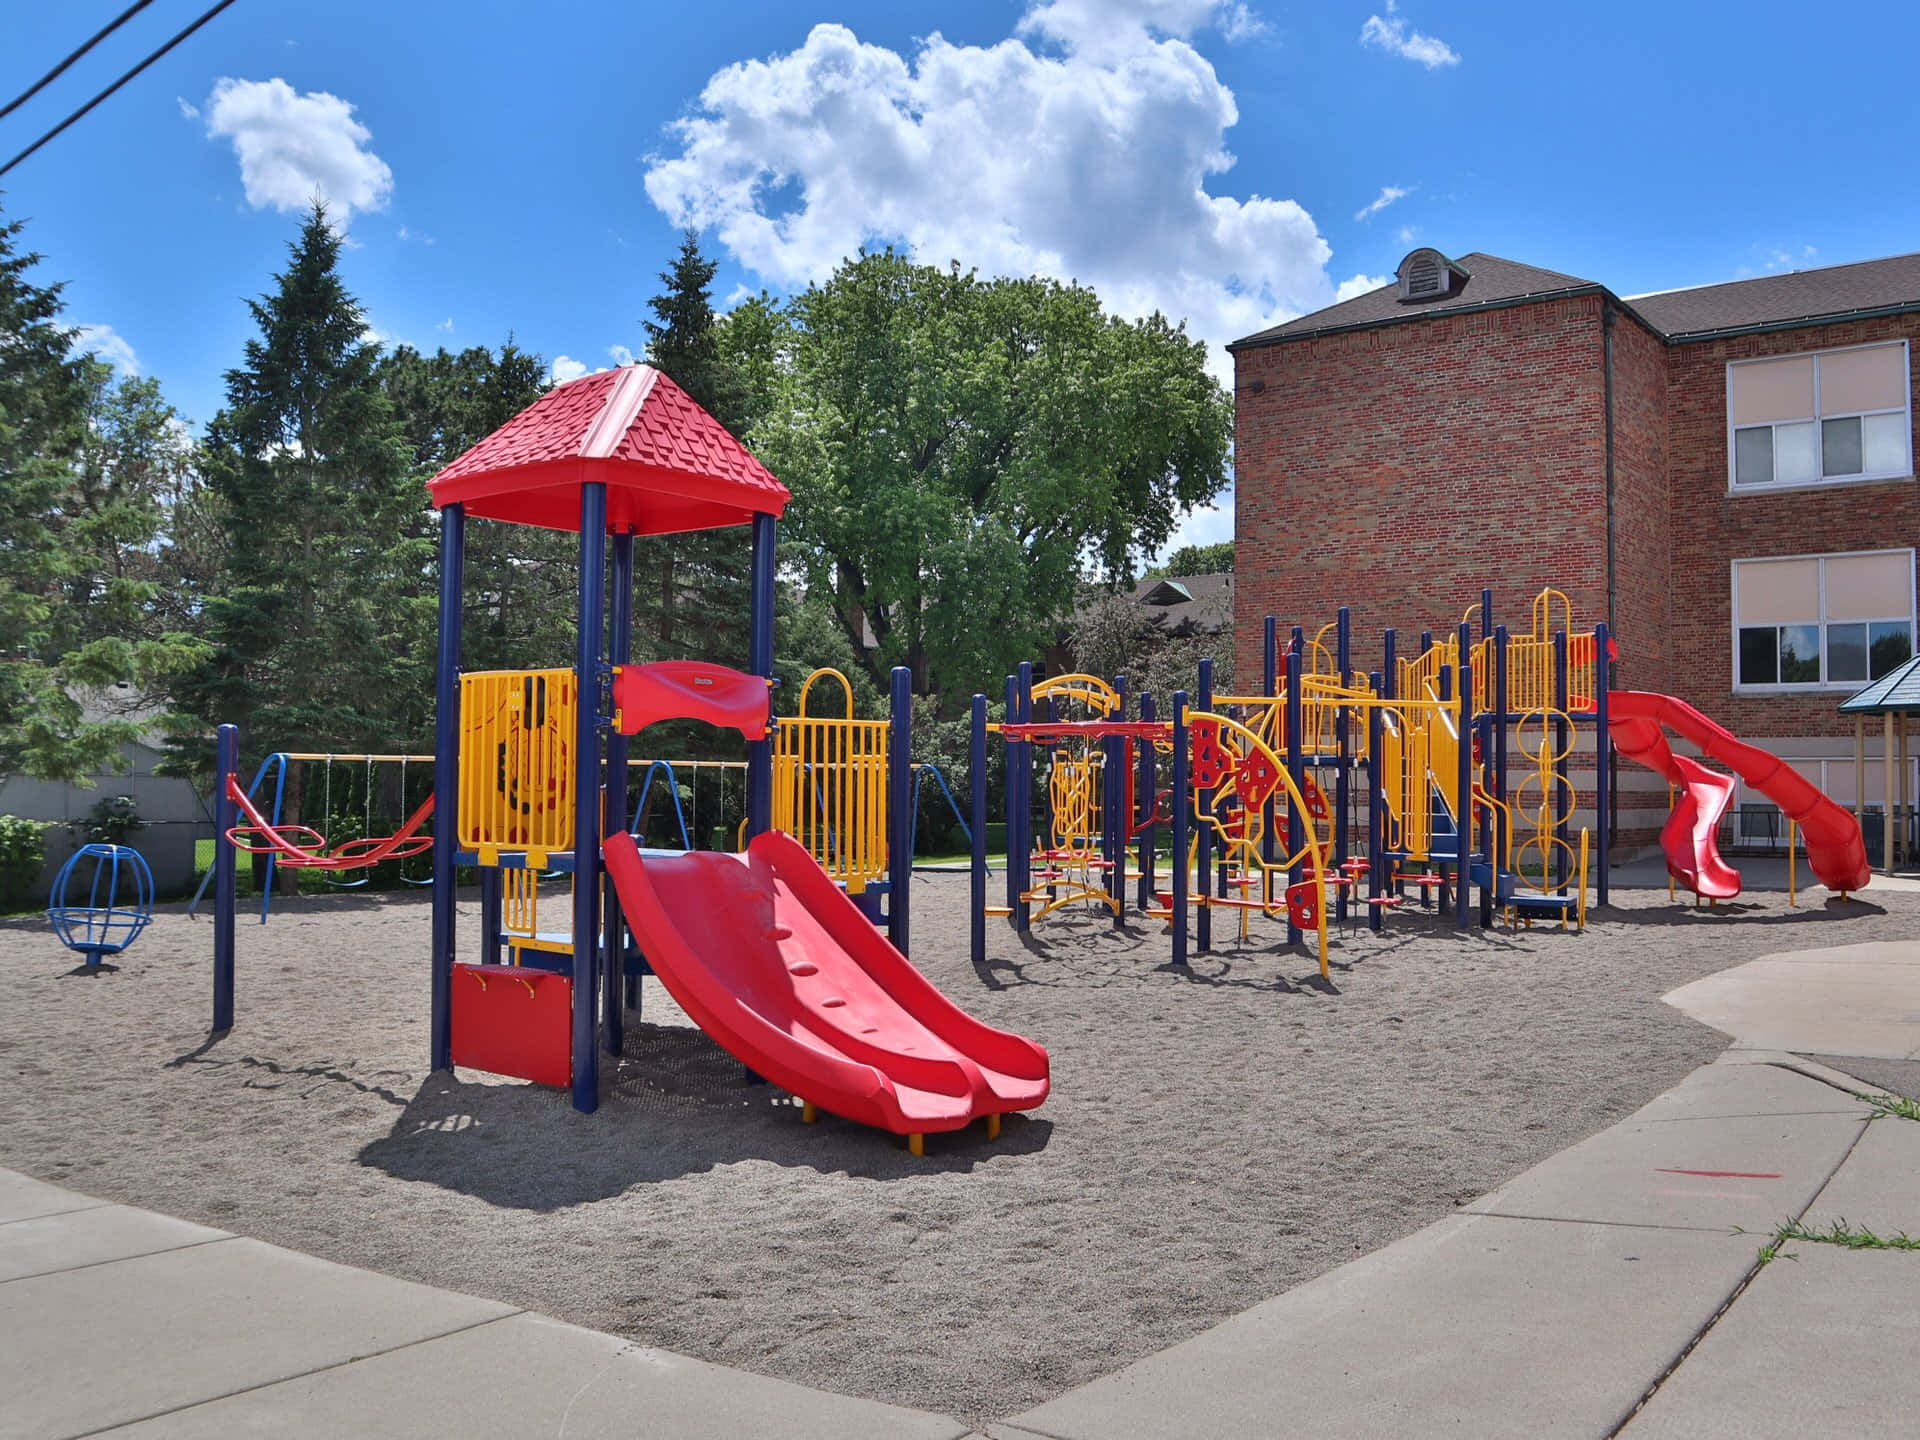 Children playing in a park with various playground equipment